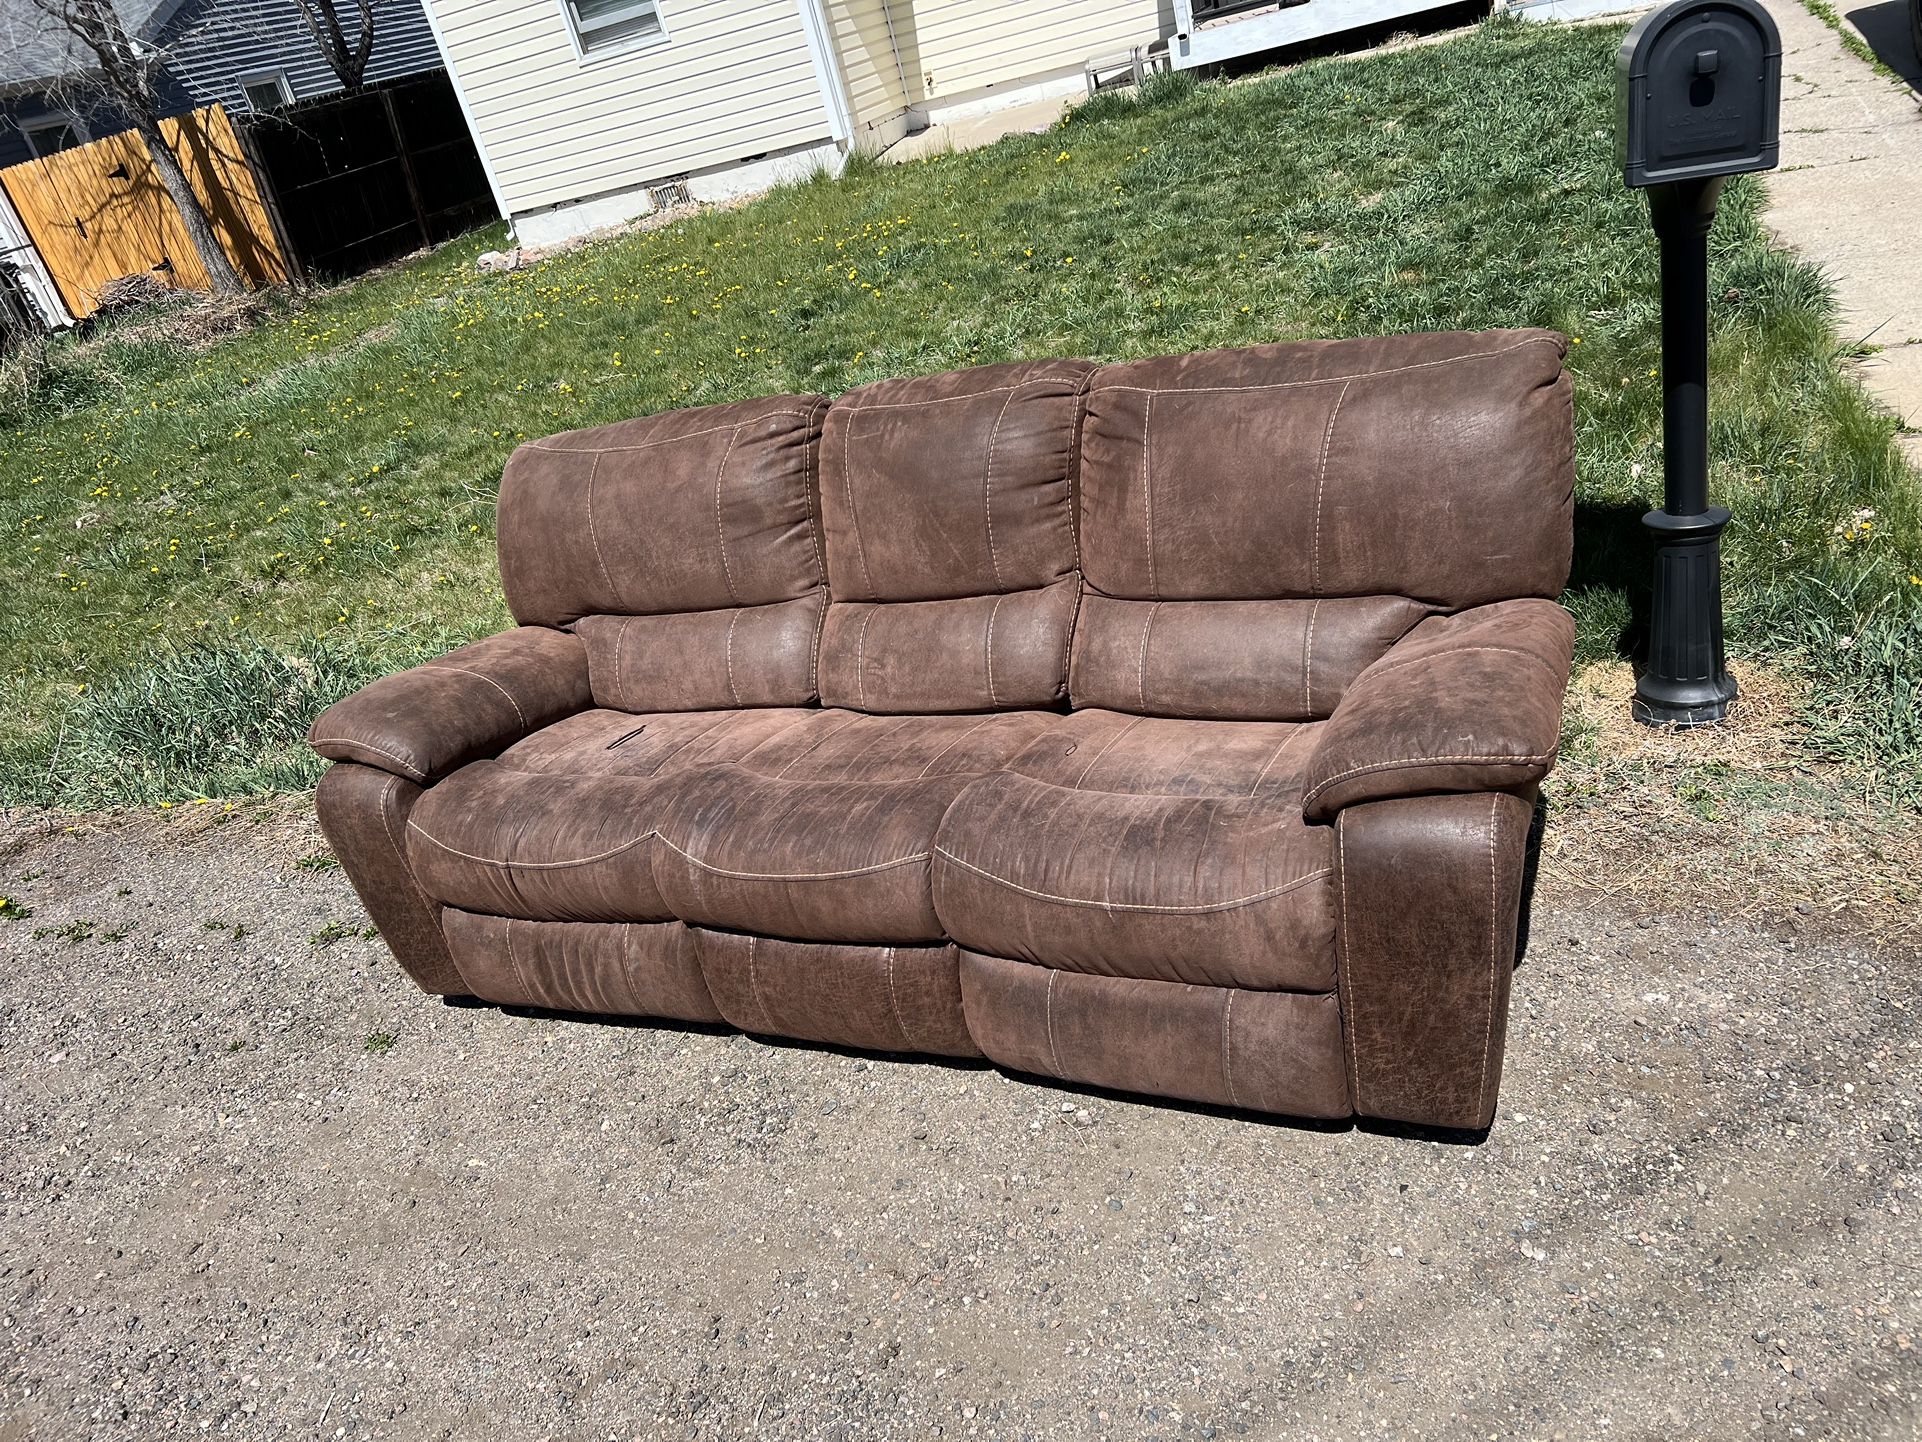 Free Couch Recliner 